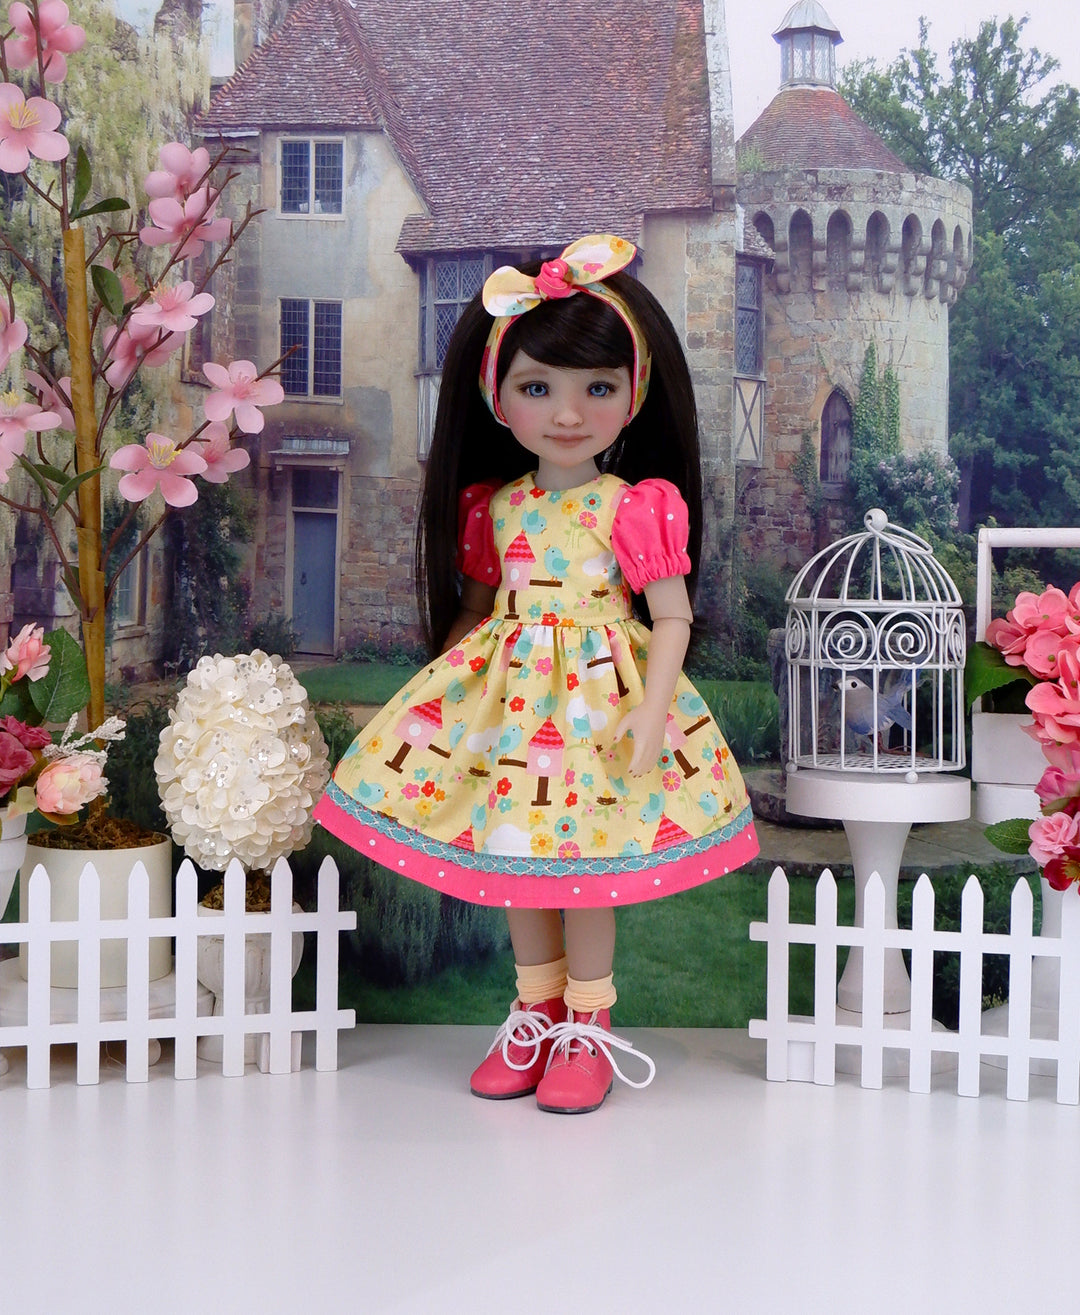 Bluebird House - dress and boots for Ruby Red Fashion Friends doll